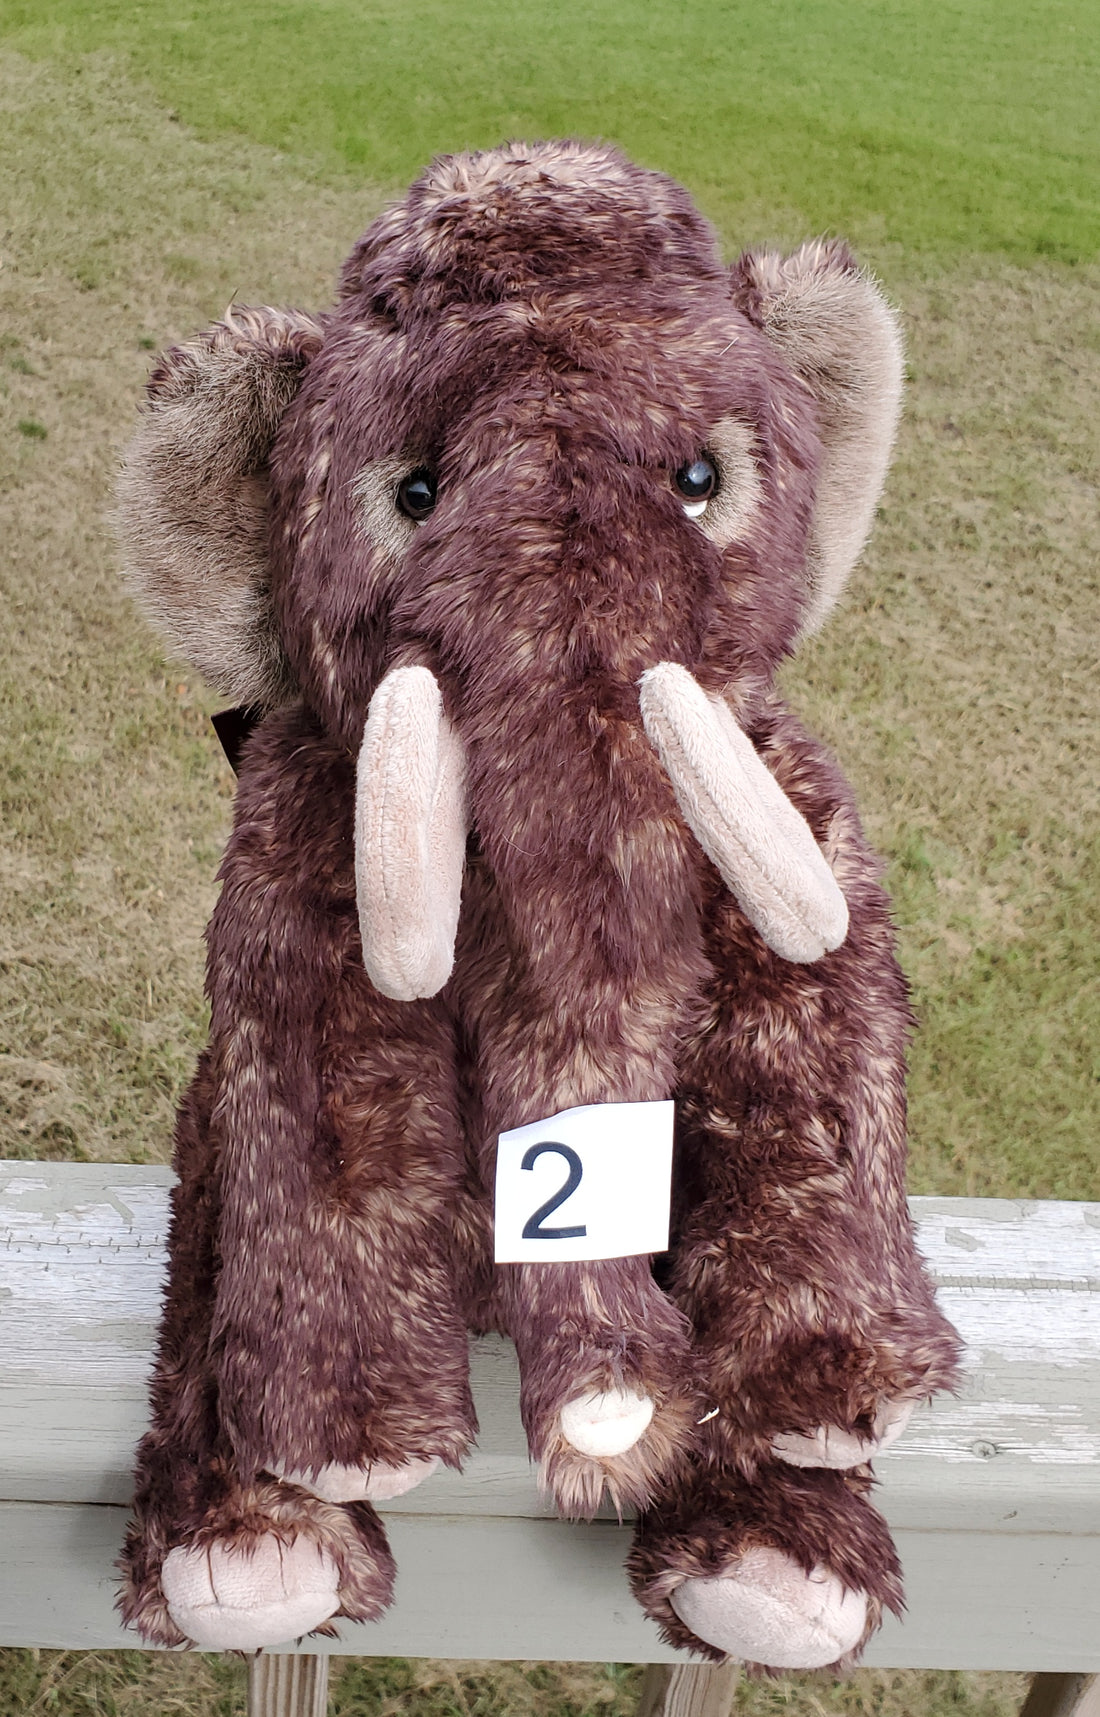 Mighty - 15.5" Woolly Mammoth Non-Jointed by Charlie Bears